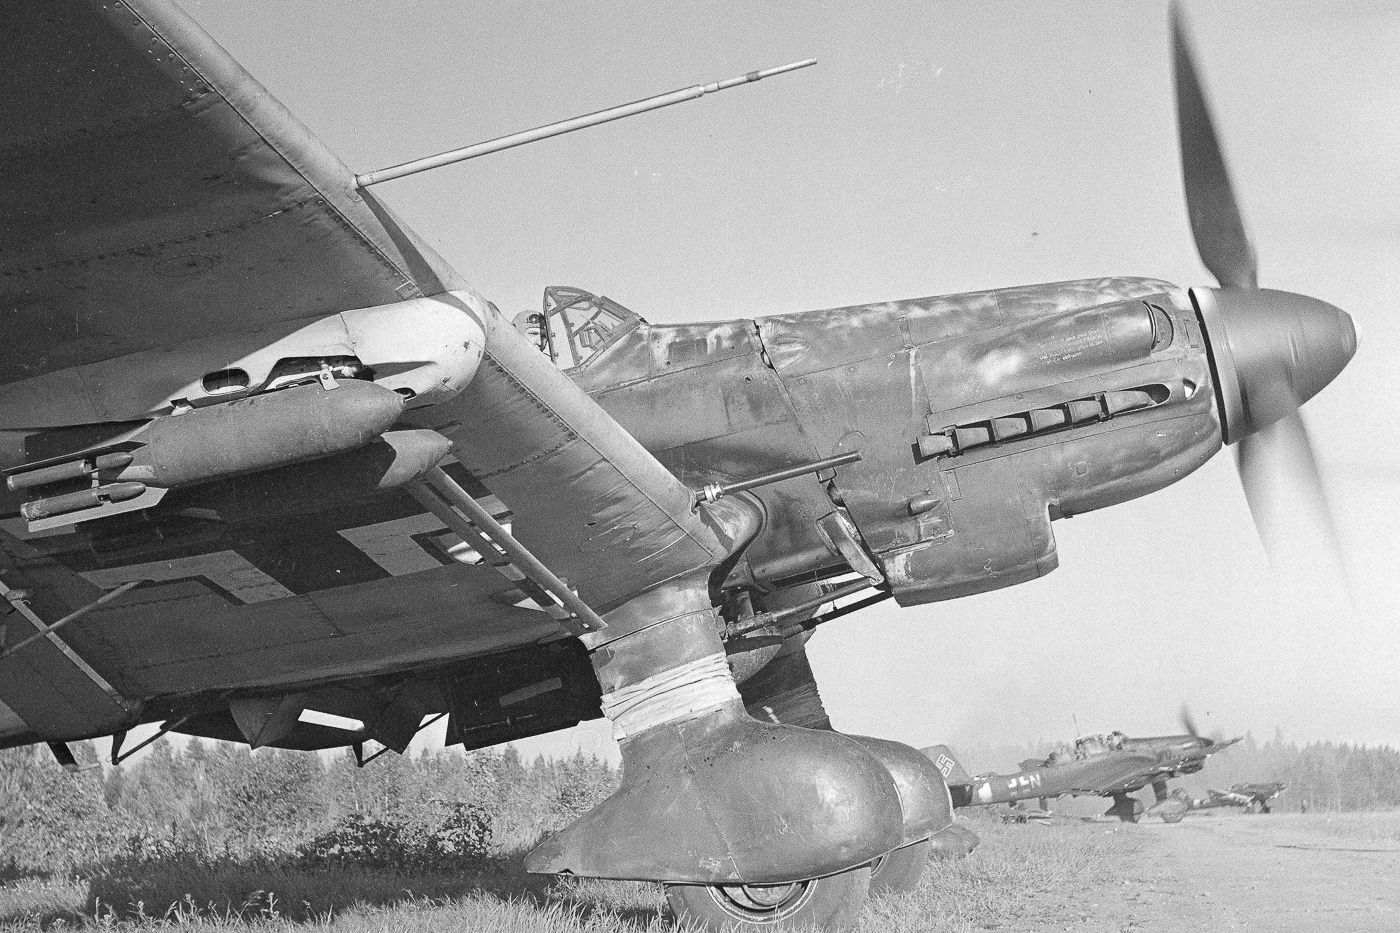 In this photograph, we see a Junkers Ju 87 D-5 Stuka dive bomber taxis for a bombing flight against Soviet troops in Finland.